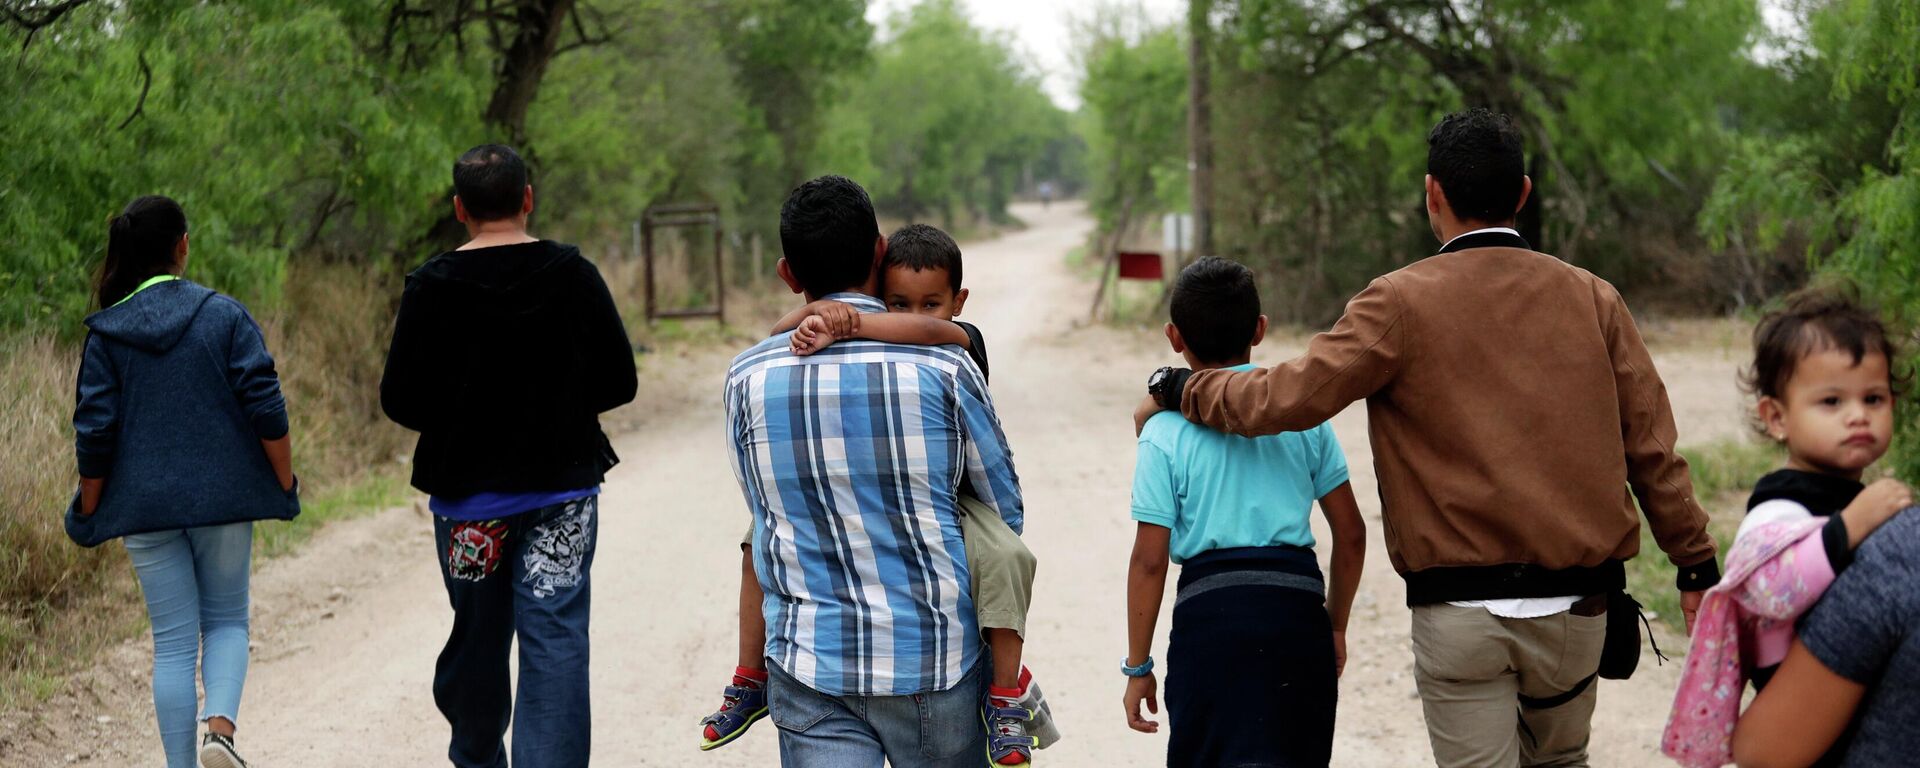 A group of migrant families walk from the Rio Grande, the river separating the U.S. and Mexico in Texas, near McAllen, Texas, March 14, 2019.  - Sputnik International, 1920, 28.04.2022